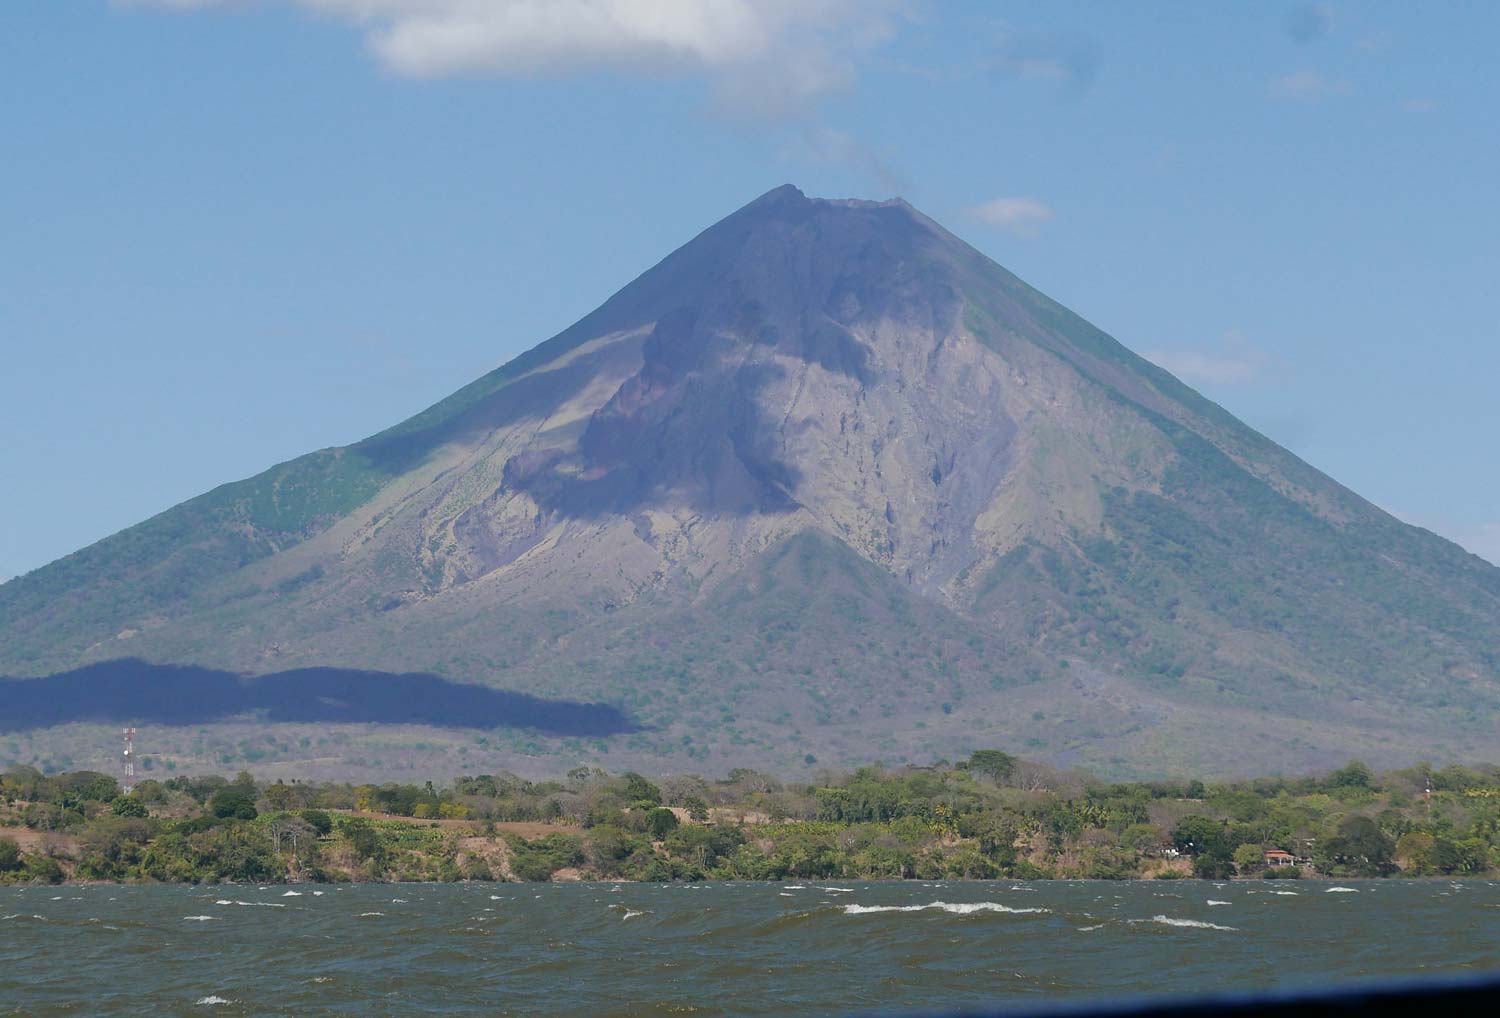 Volcan Concepcion on Ometepe island in Nicaragua, seen from the lake